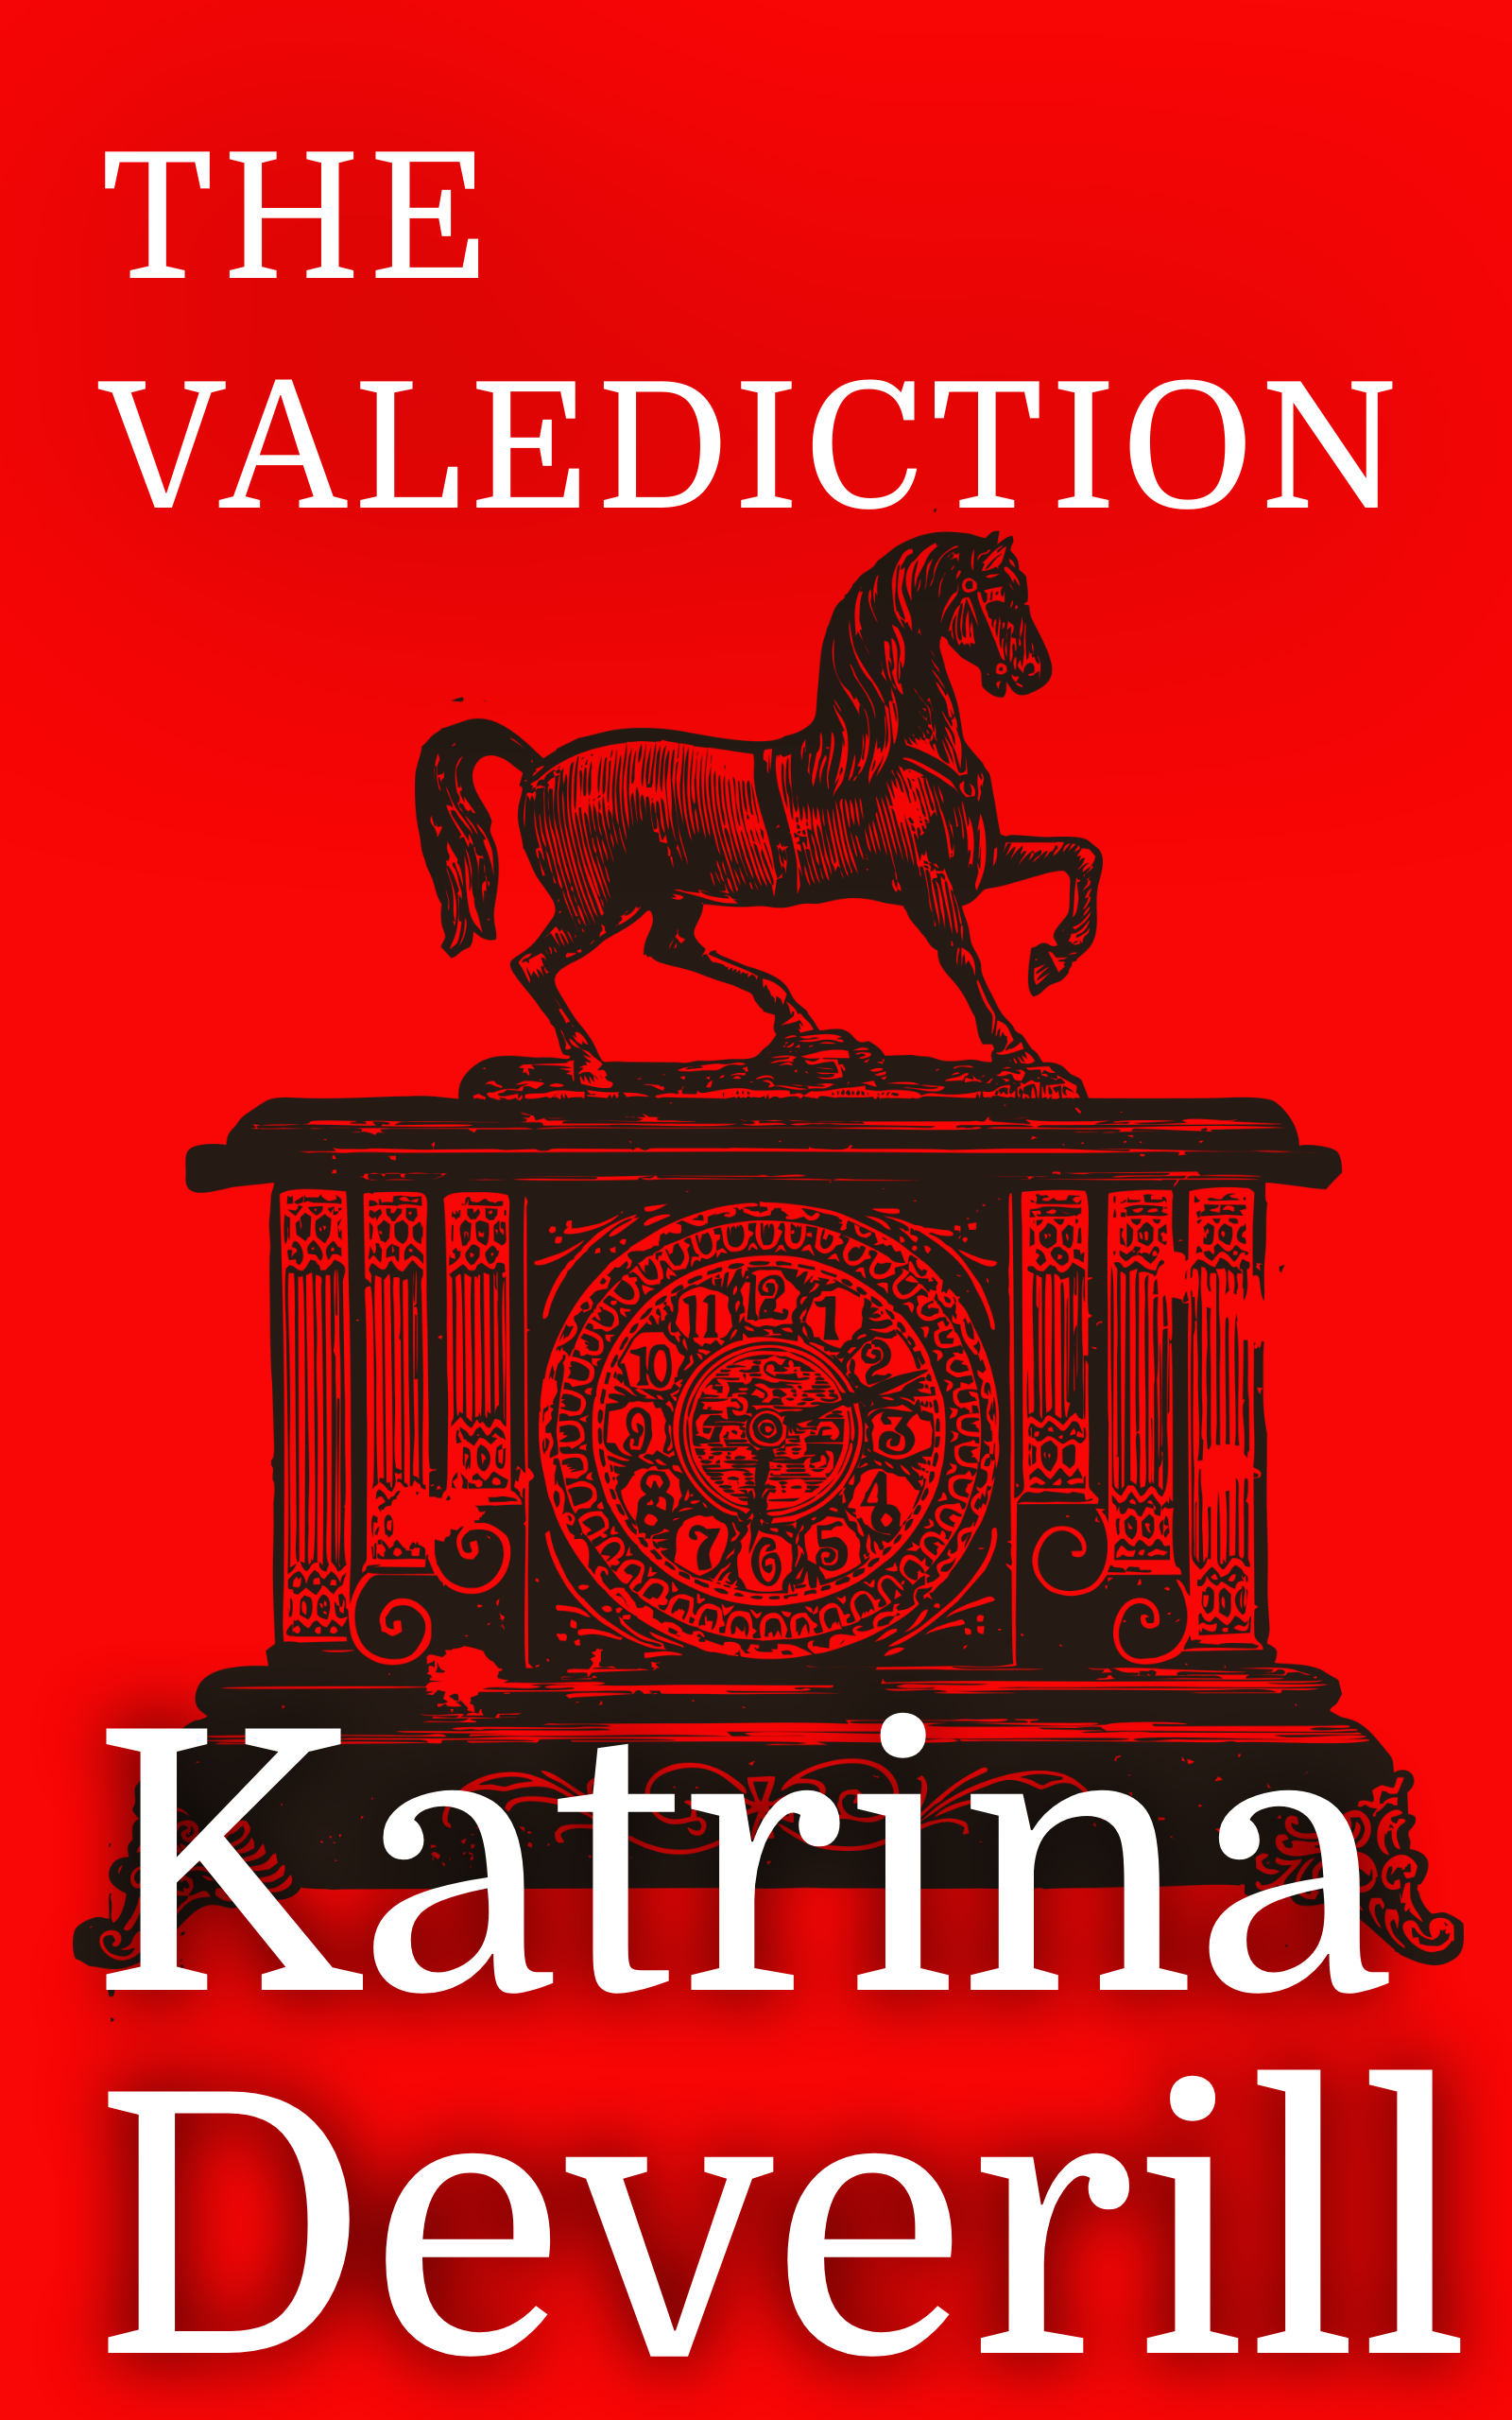 A bright red book cover with a clock featuring a statue of a horse above - The Valediction by Katrina Deverill